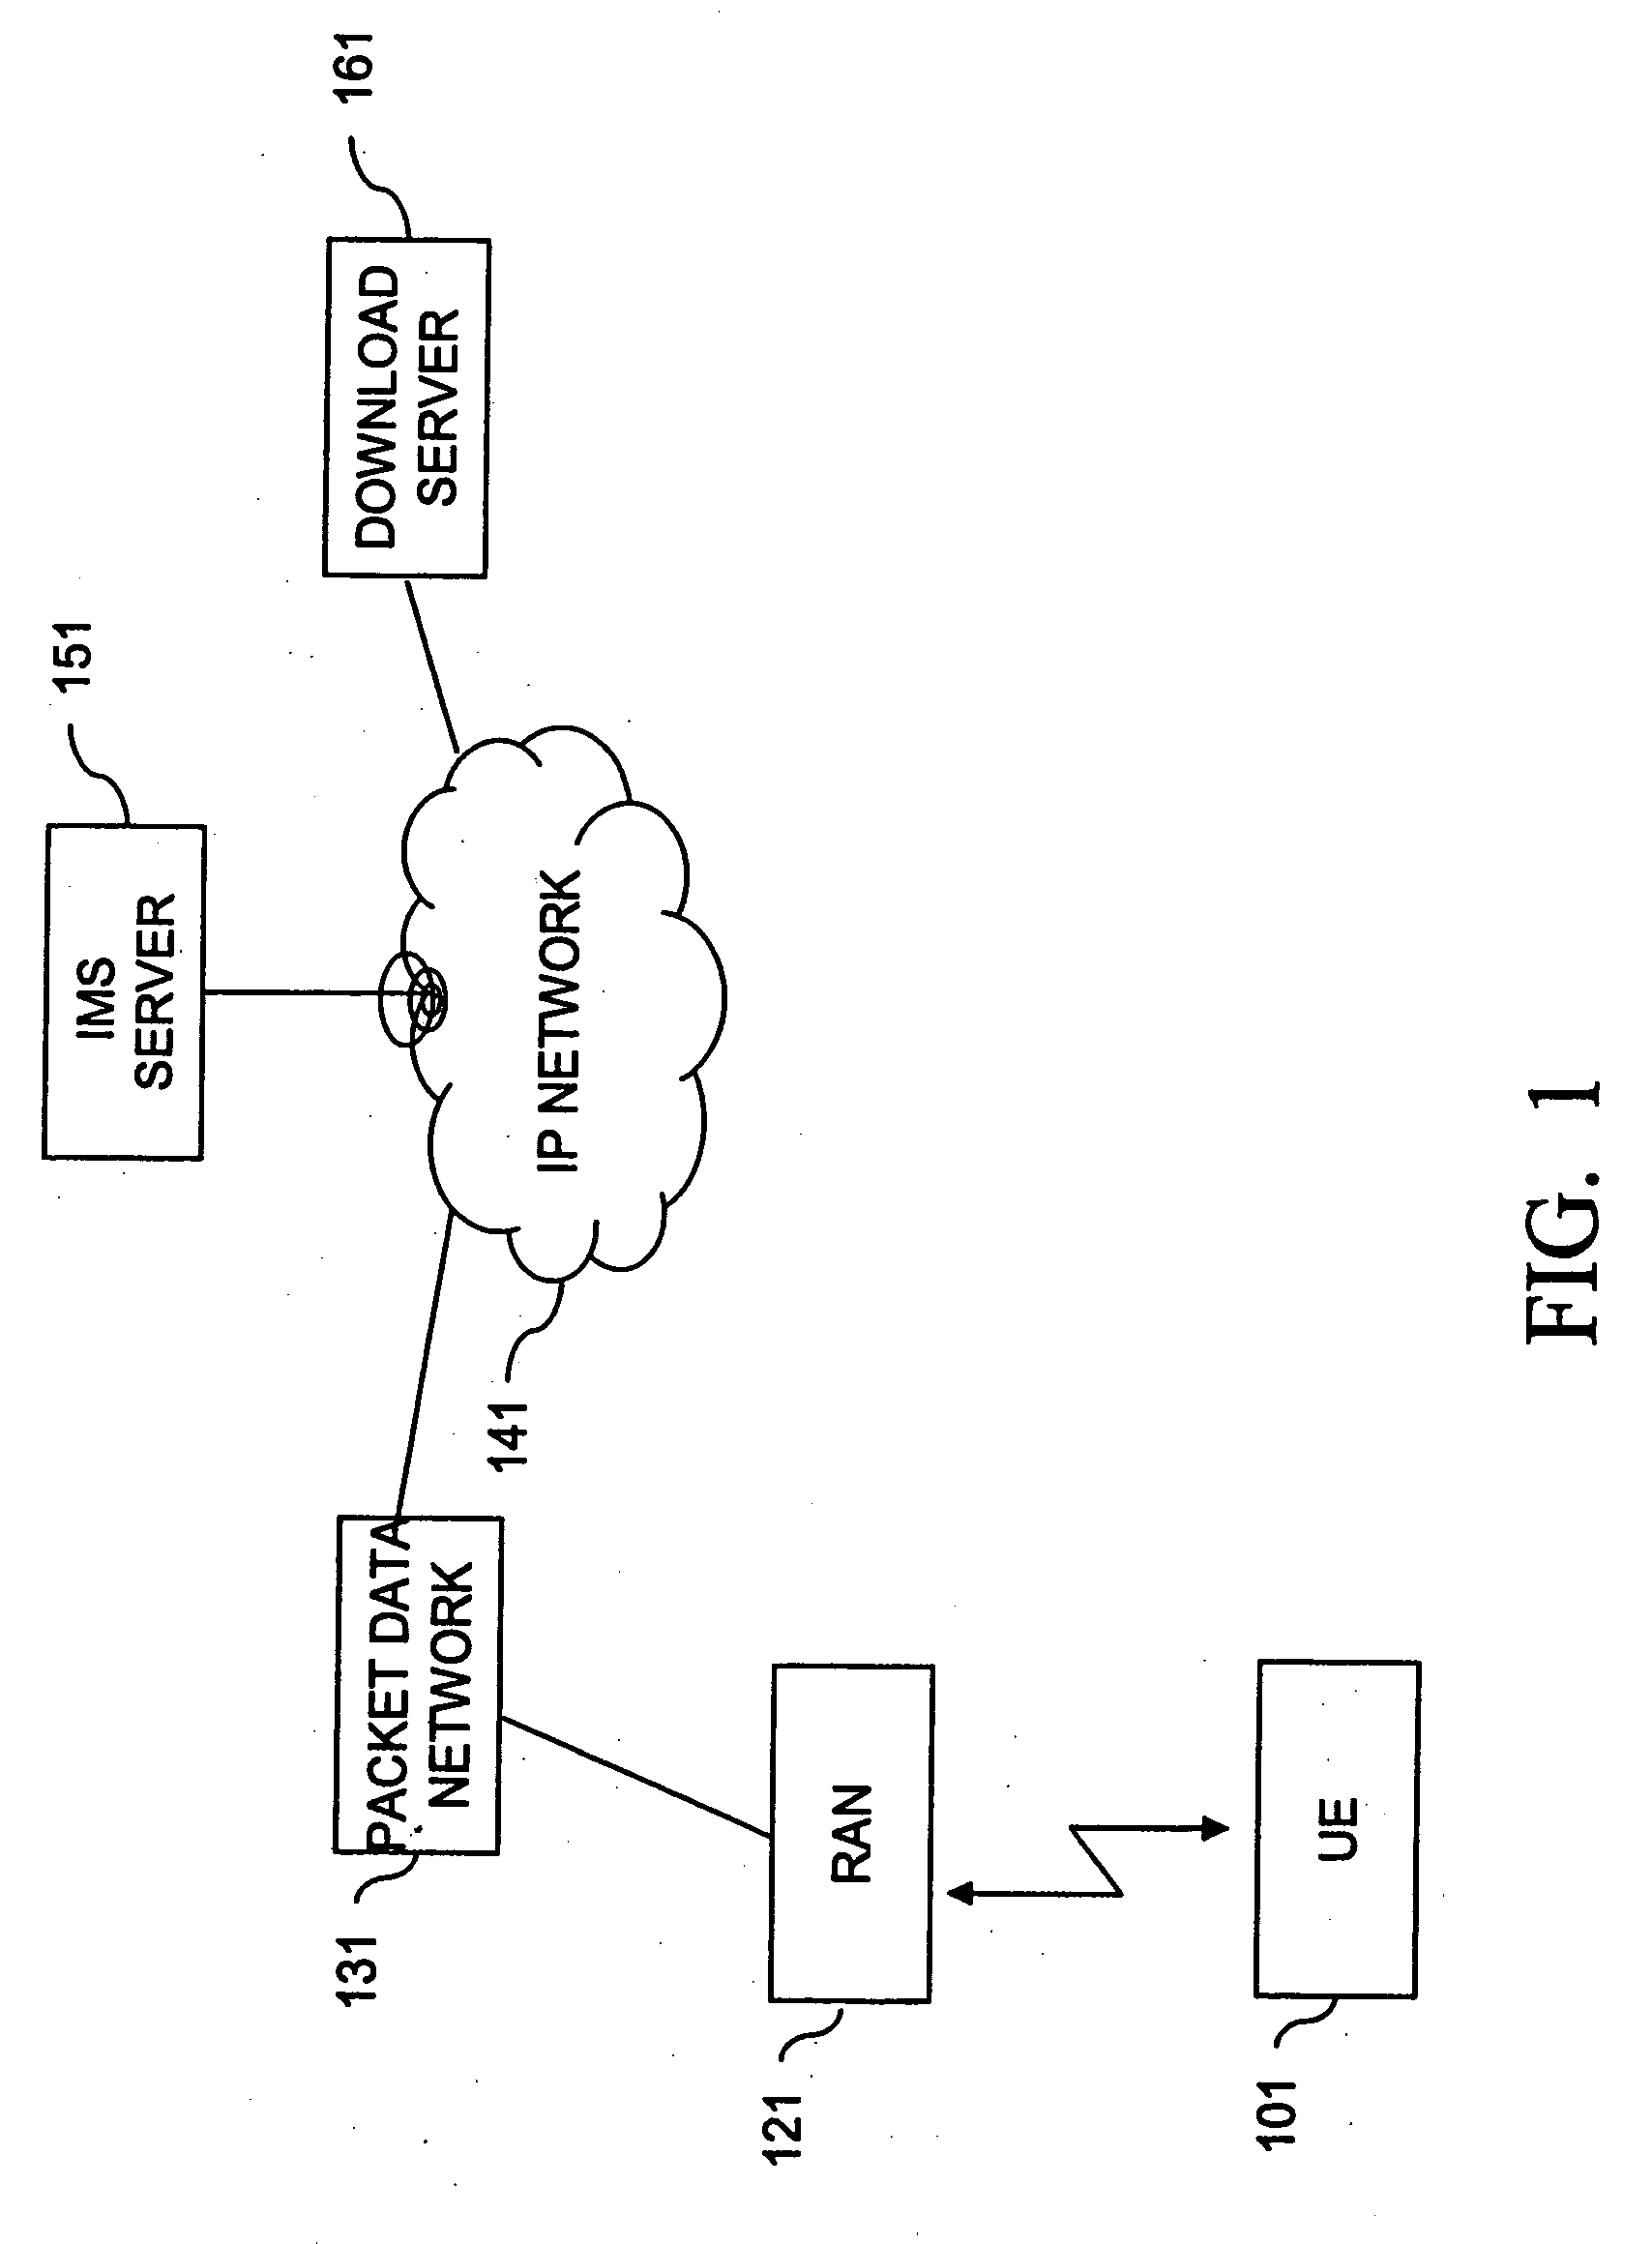 Method for providing IMS-based wireless download services